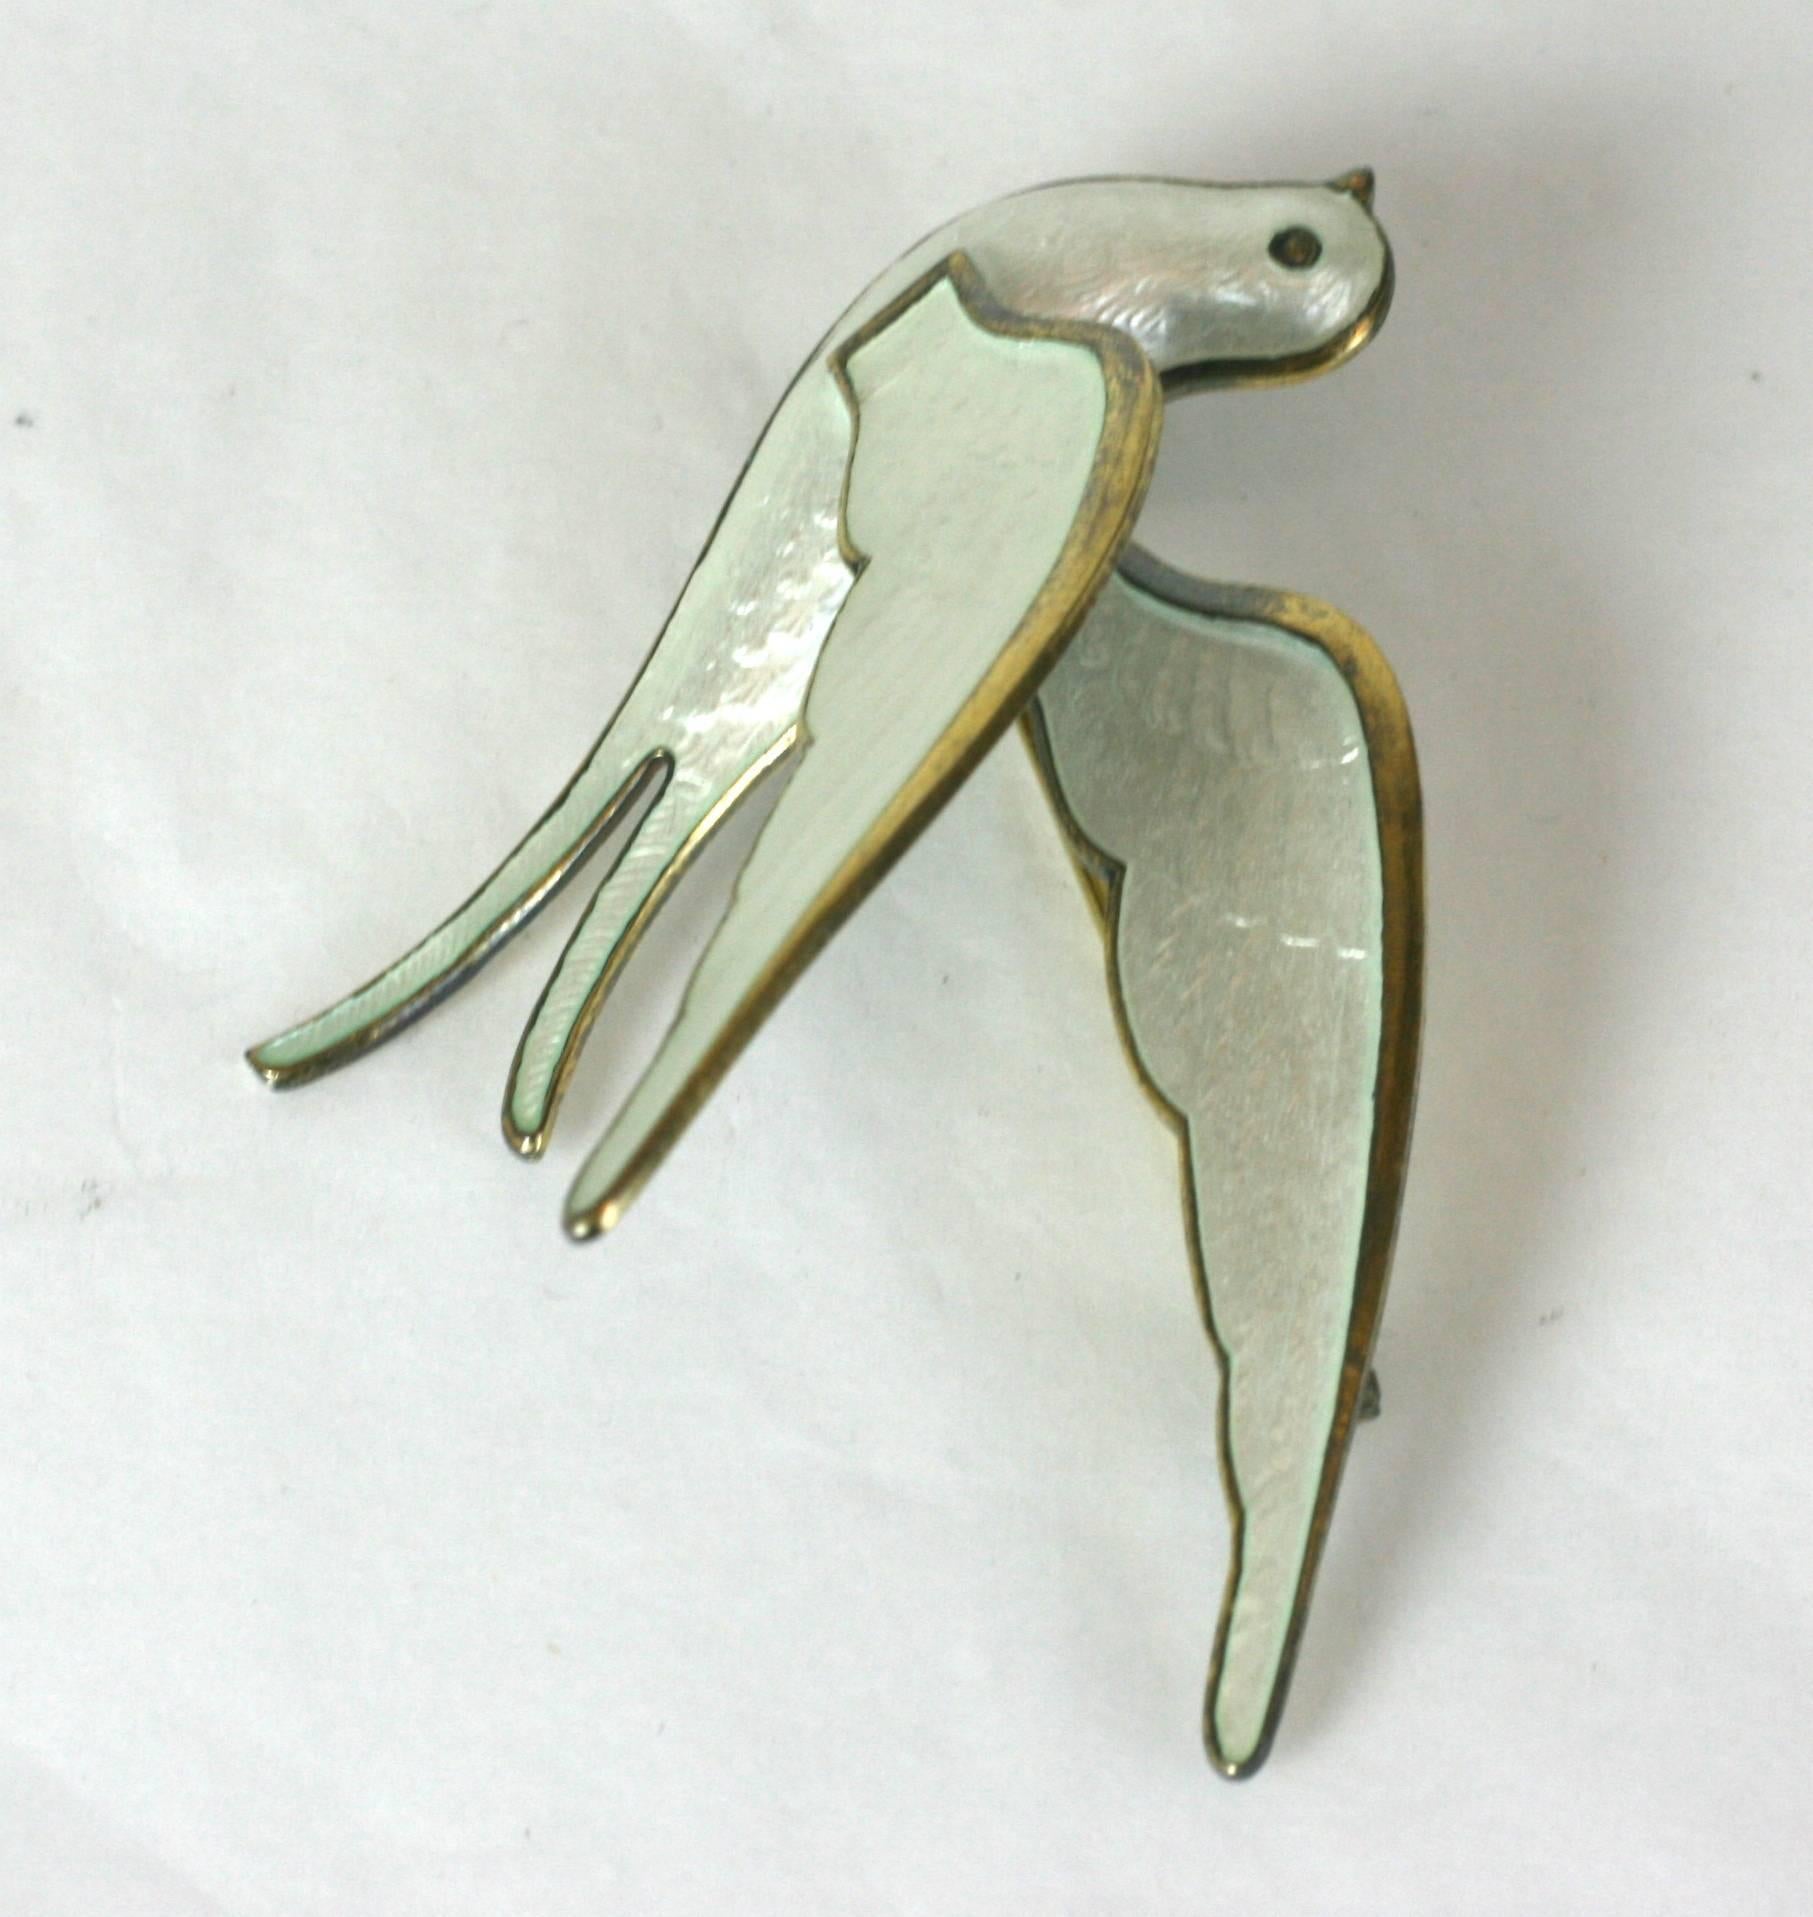 Lovely White Enamel Dove Brooch by Bernard Meldahl, Oslo, Norway. Circa 1950. 
Made of Sterling silver with a gold wash and pristine white enamel.
Excellent condition and nice scale. 
2